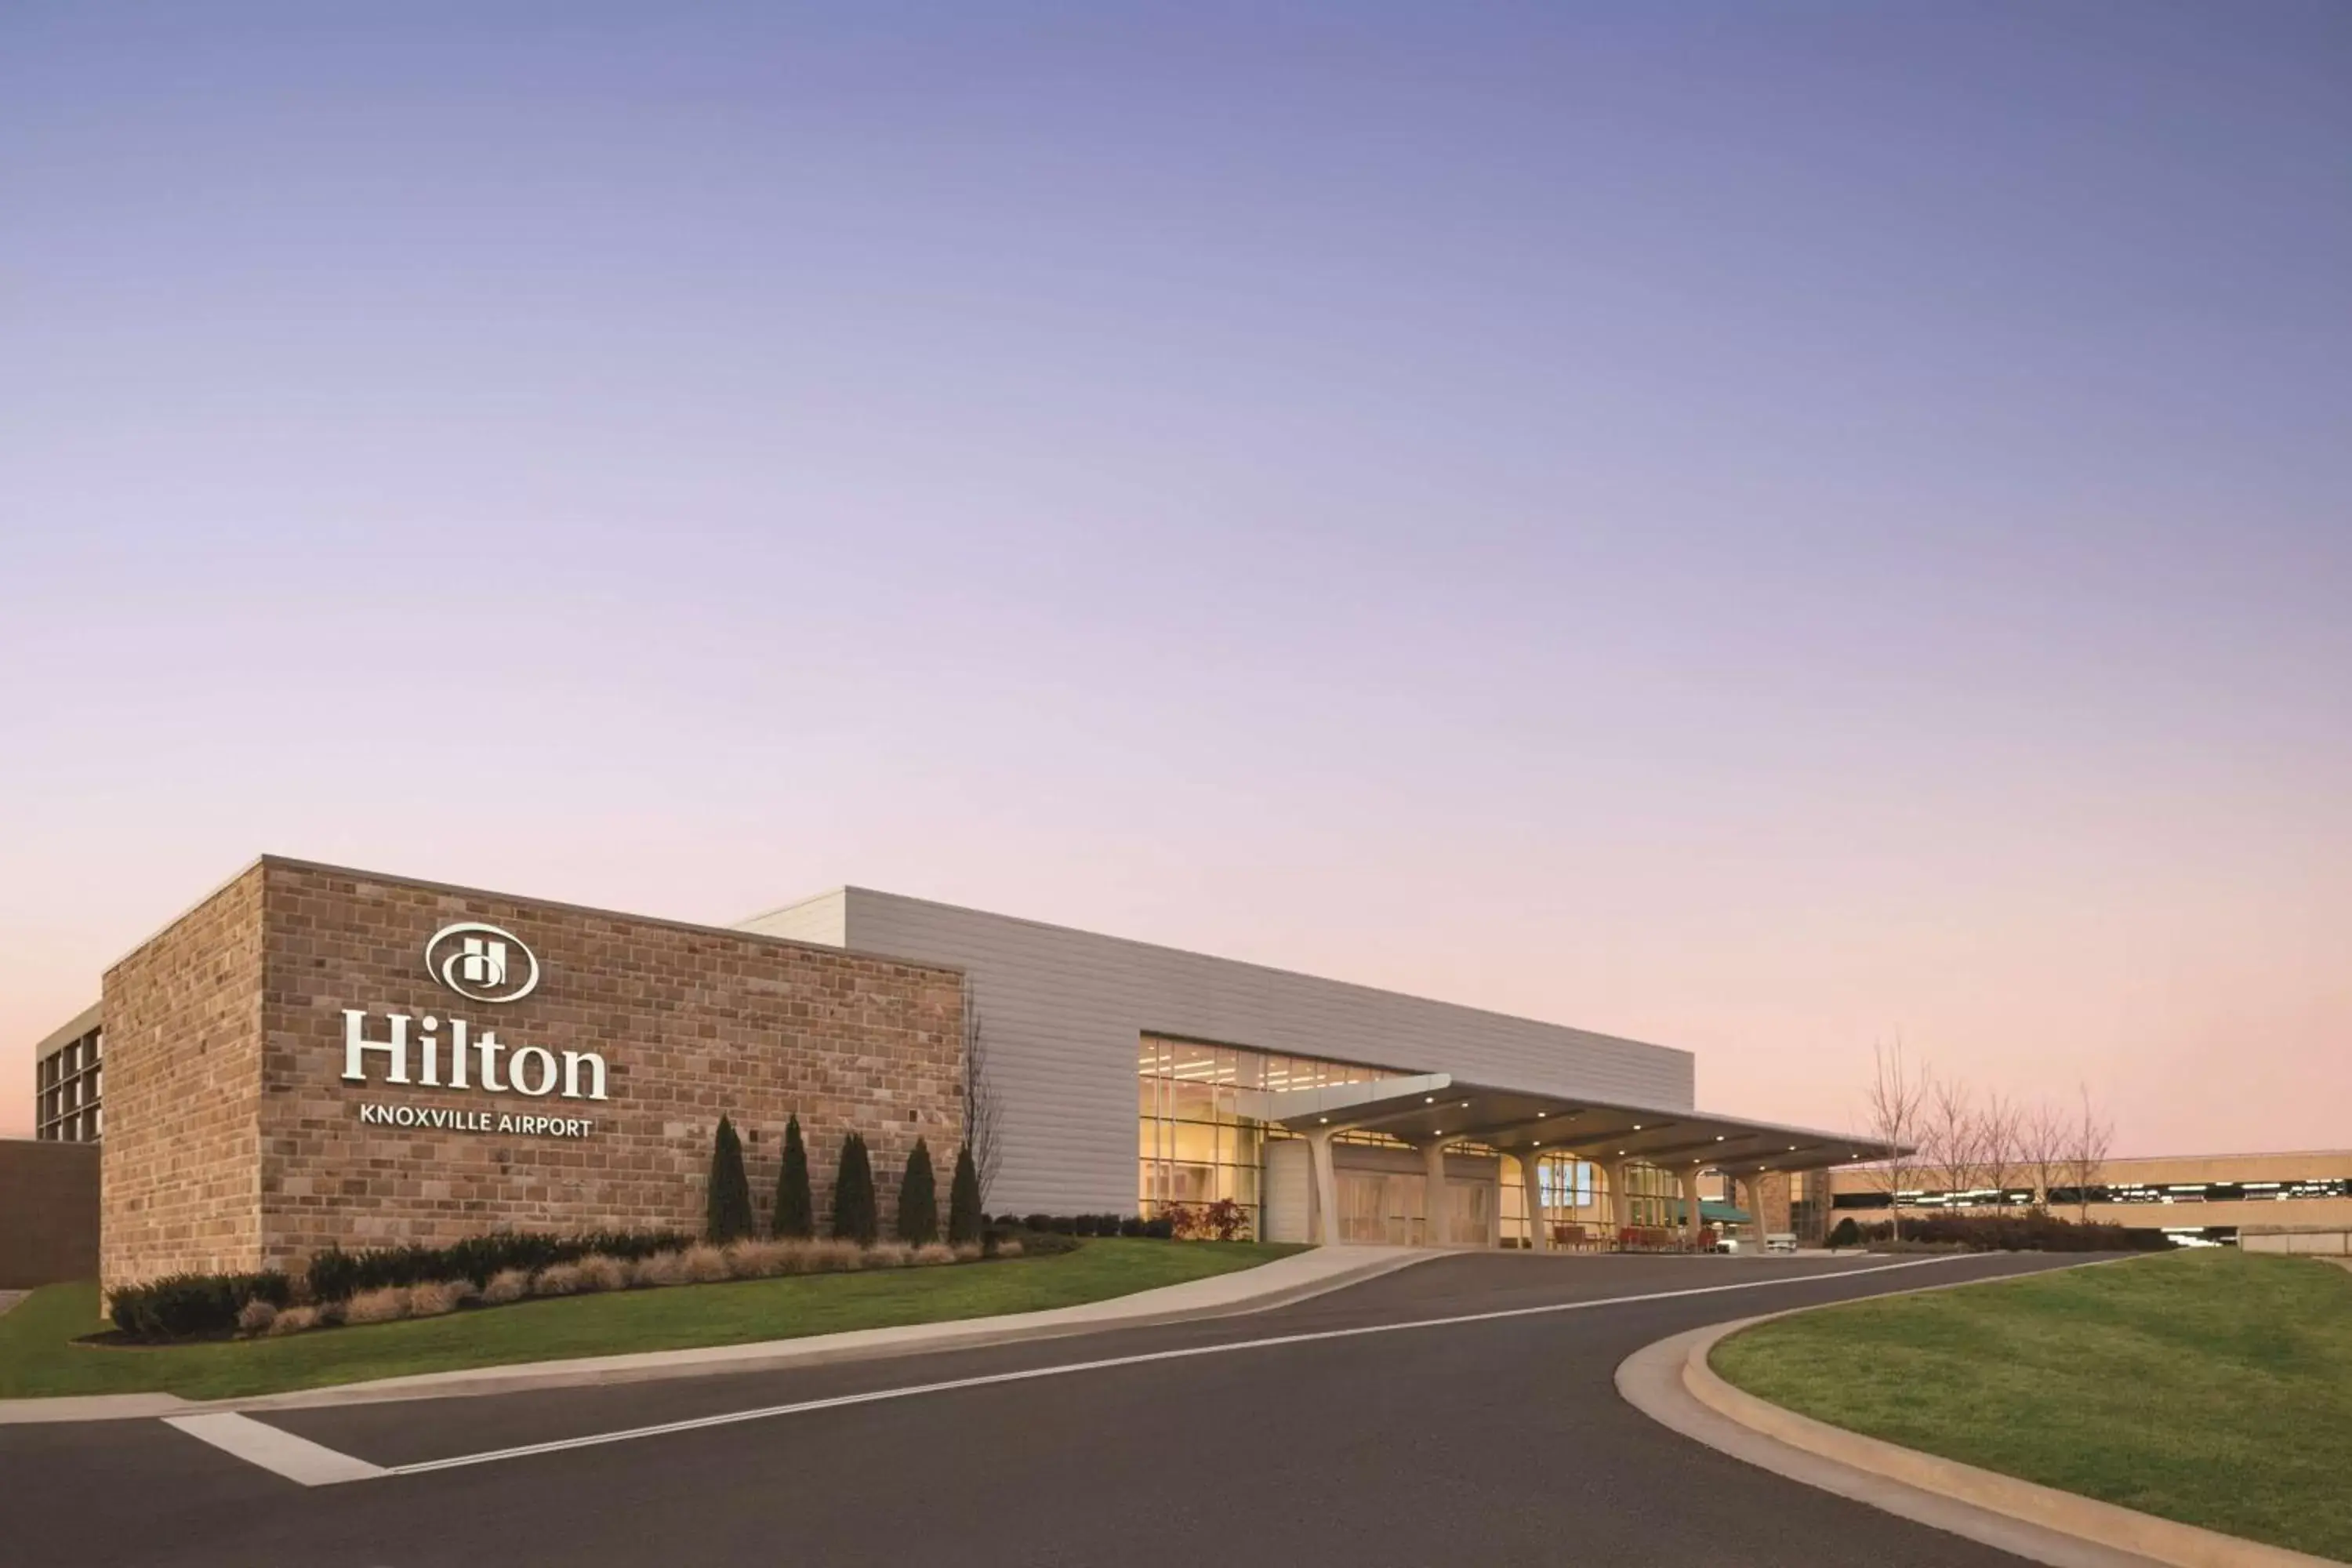 Property Building in Hilton Knoxville Airport